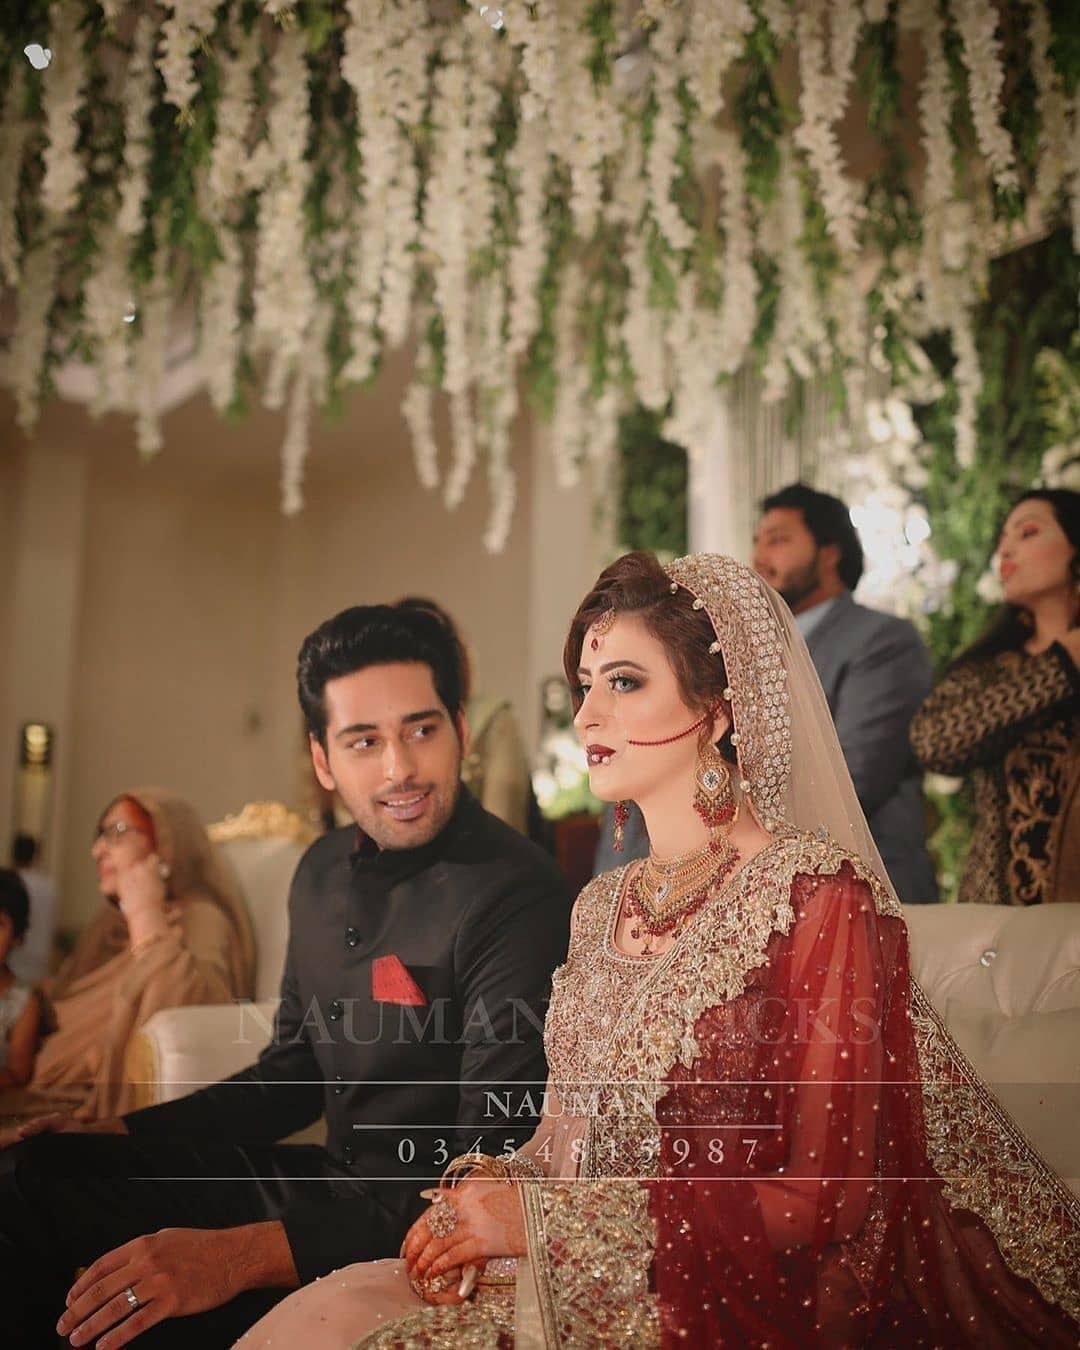 Awesome Videos From Humayun Saeed S Brother Salman Saeed Wedding Daily Infotainment